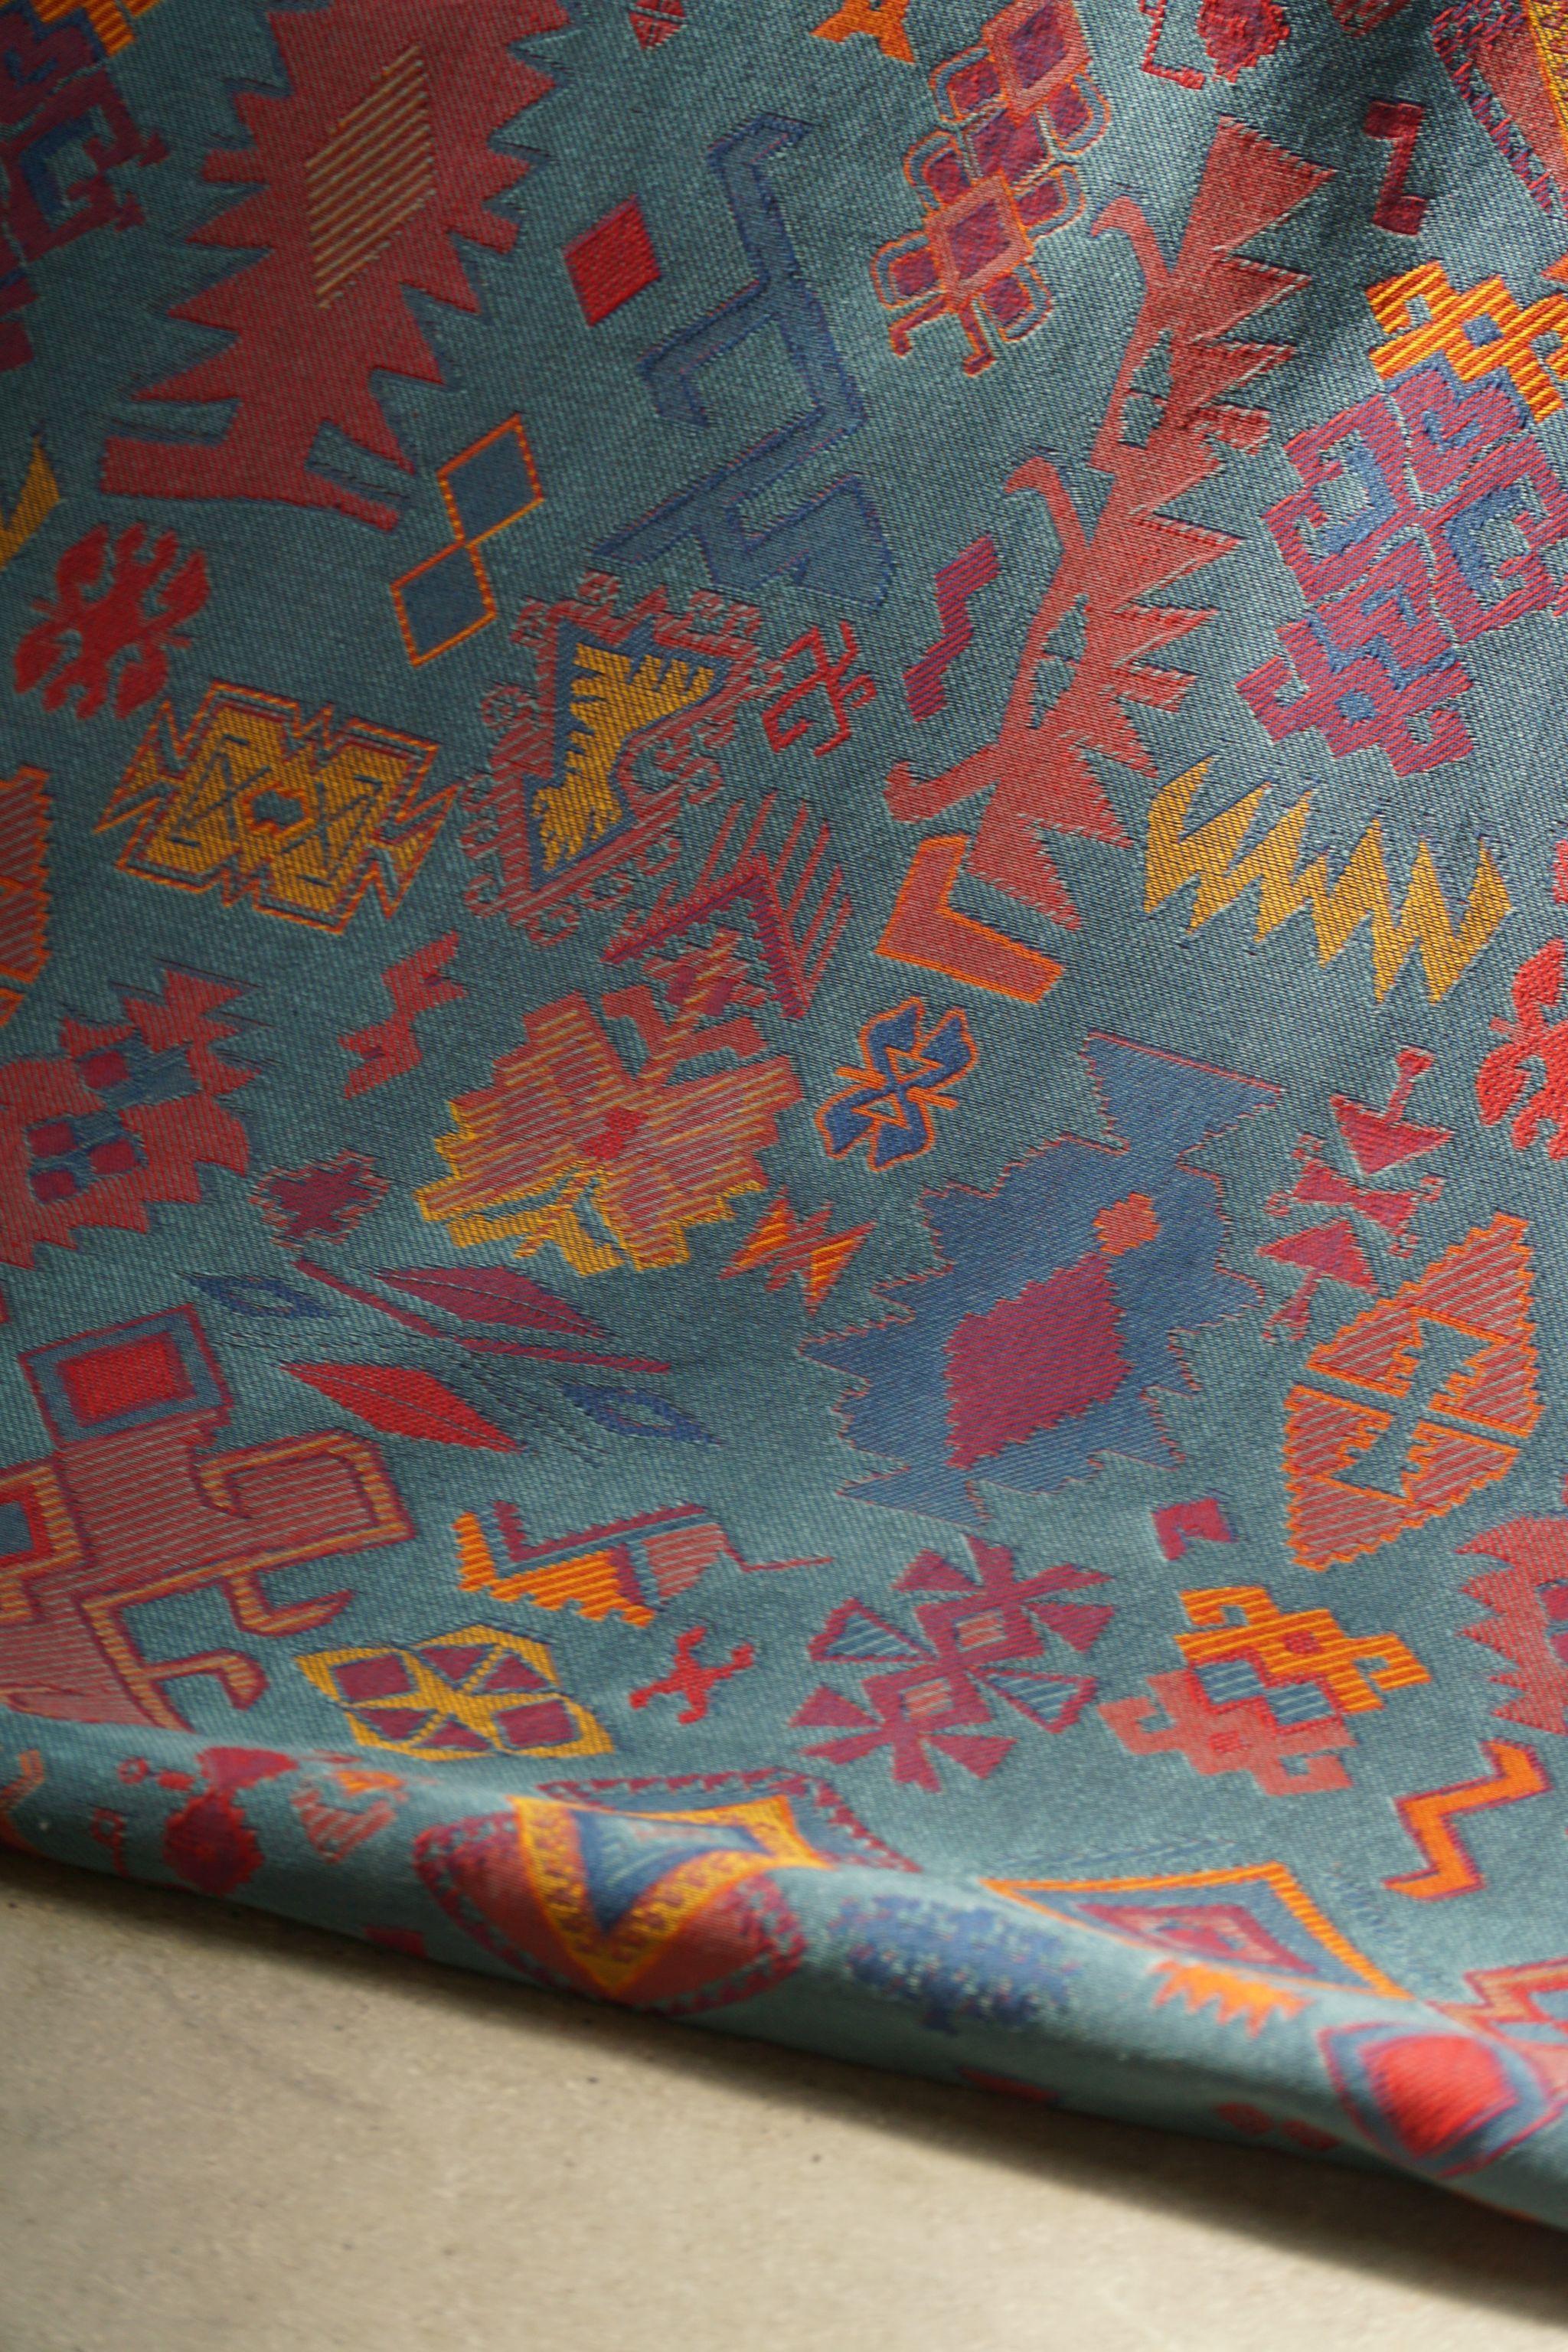 Cotton Vintage Gobelin Upholstery Fabric in Various Blue & Red Colors, Late 20th C For Sale